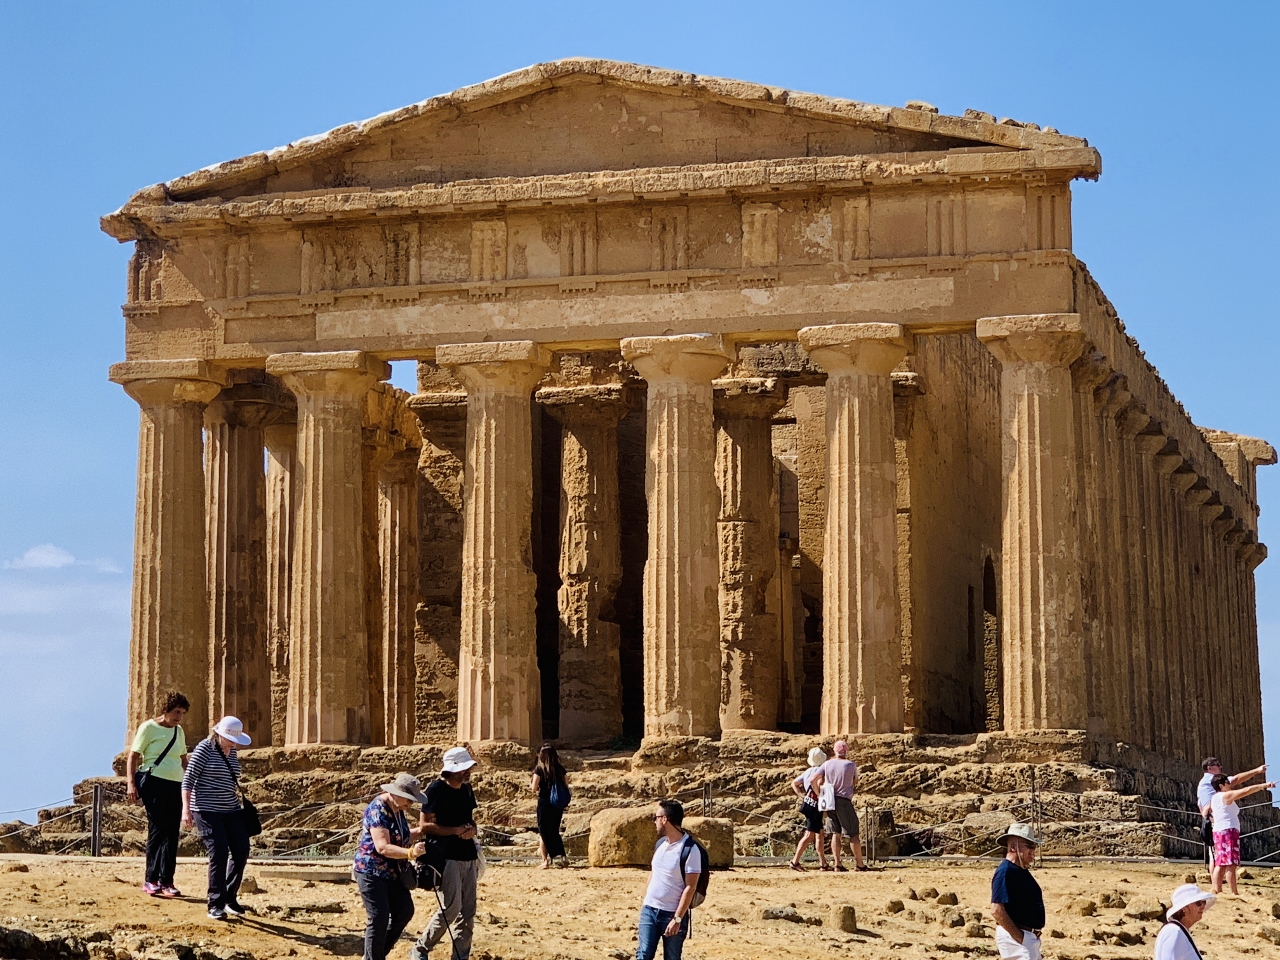 Travels to Sicily – Noto, Siracusa, Ragusa & Agrigento (Part 2 of 3) Image 24